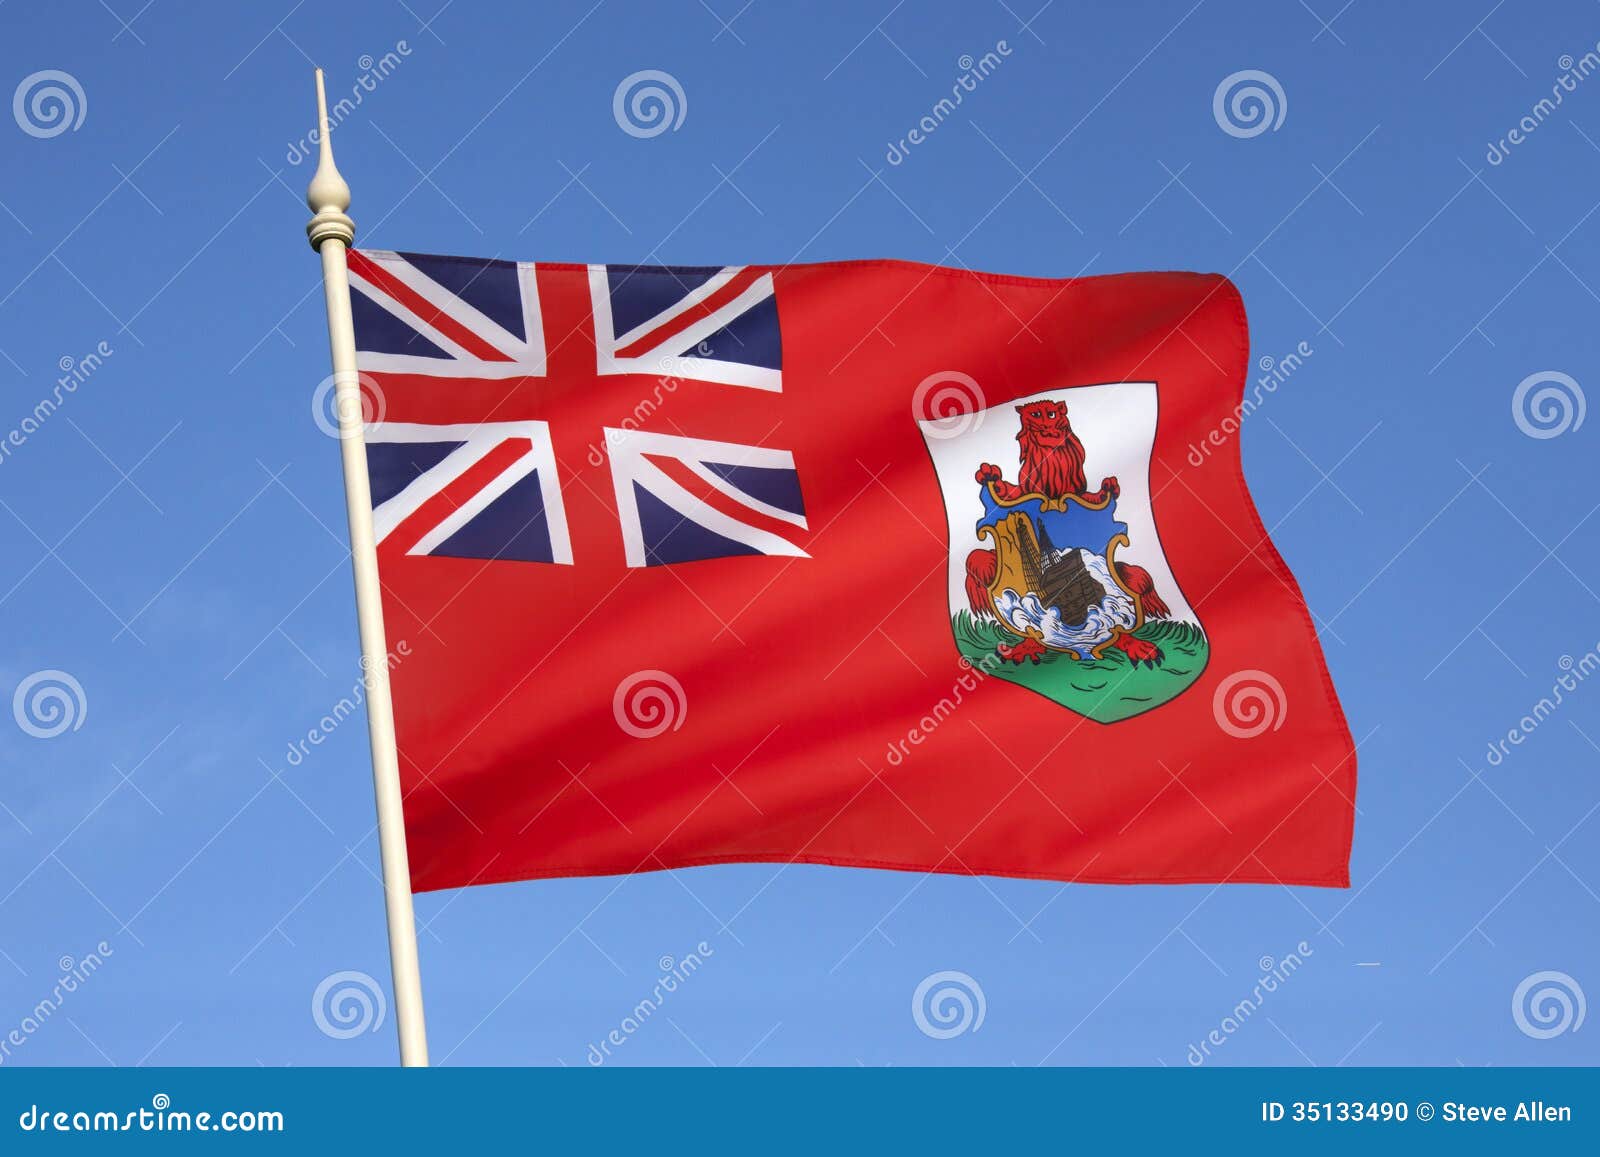 Flag of Bermuda the Caribbean Stock Photo Image of indies, travel: